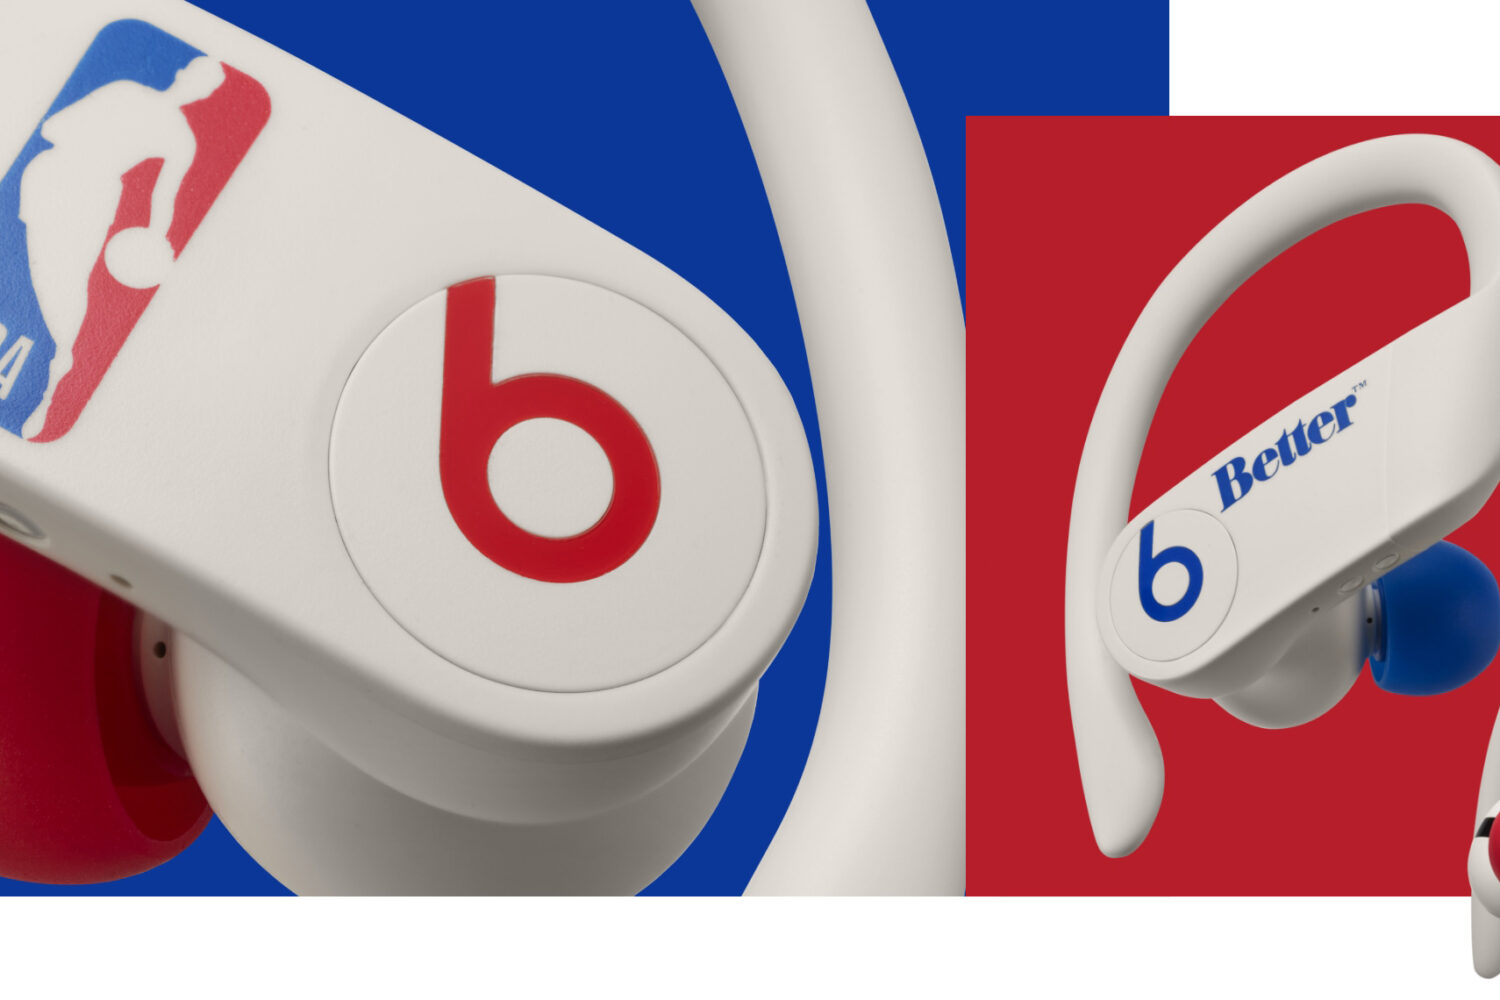 A marketing image showing the special-edition Powerbeats Pro truly wireless earbuds created for the 75th anniversary of the NBA, featuring red and blue ear tips with an NBA logo on the side